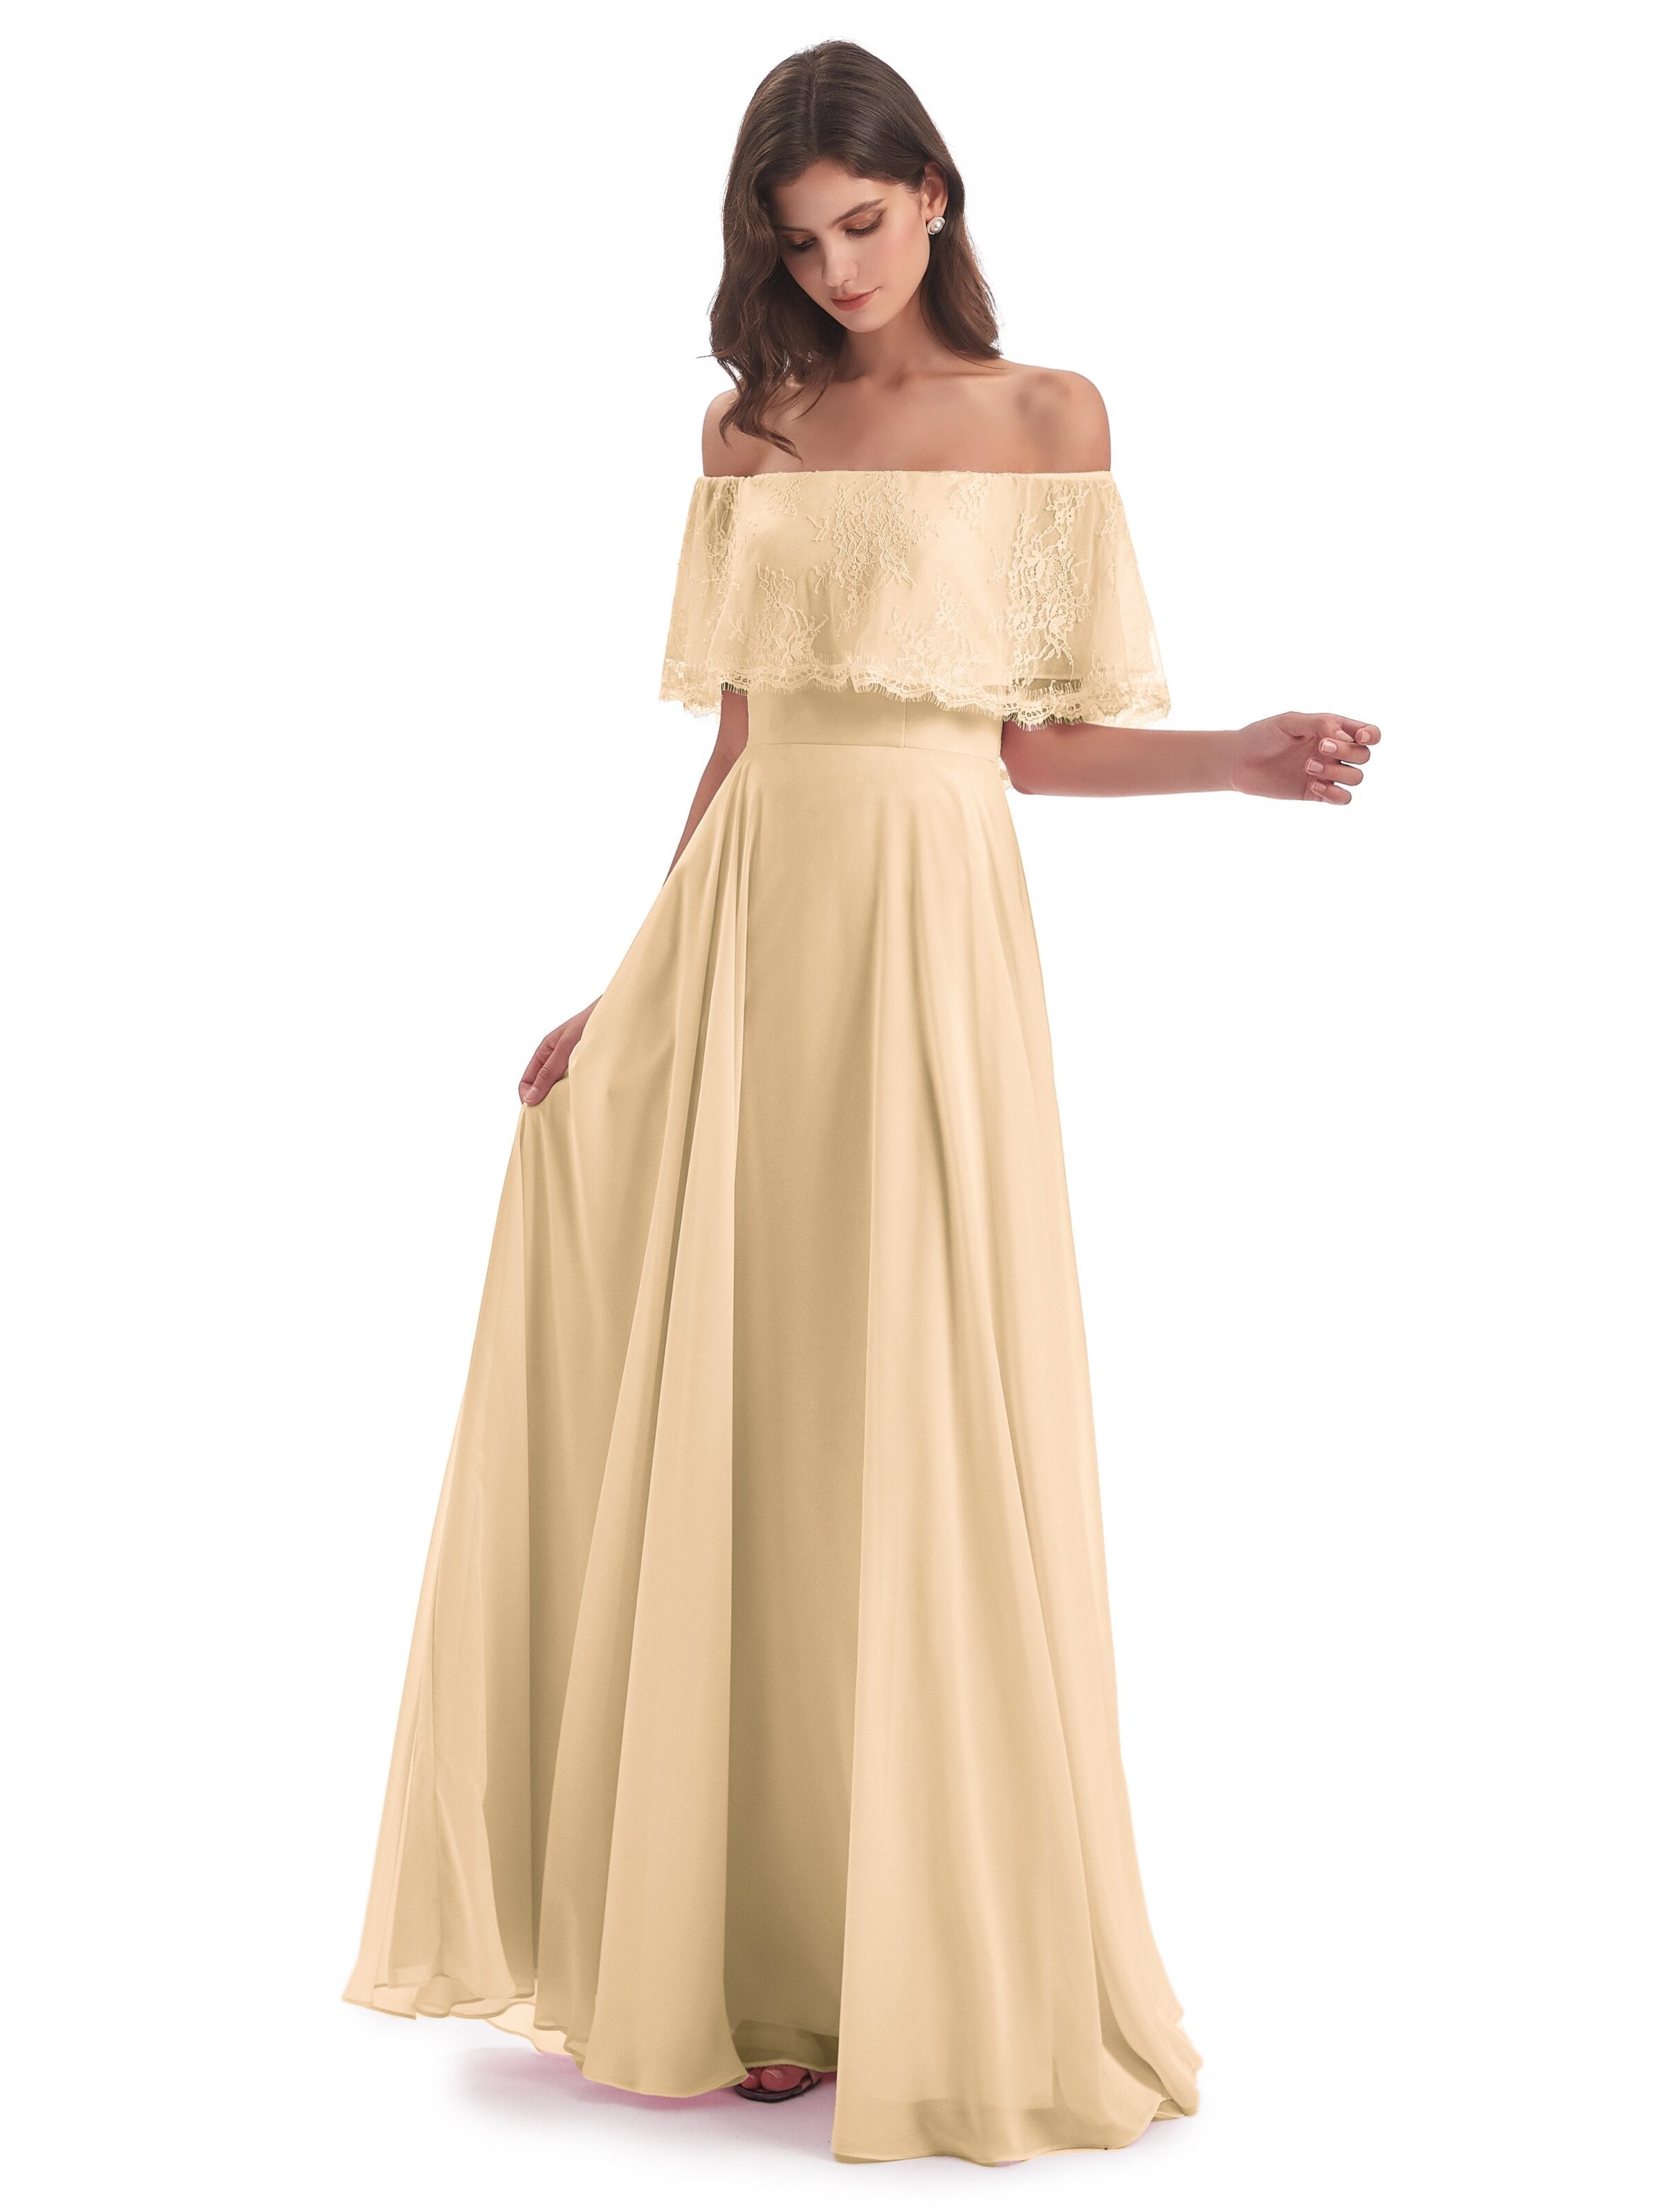 Colors for bridesmaid dresses in 2022 - Peach